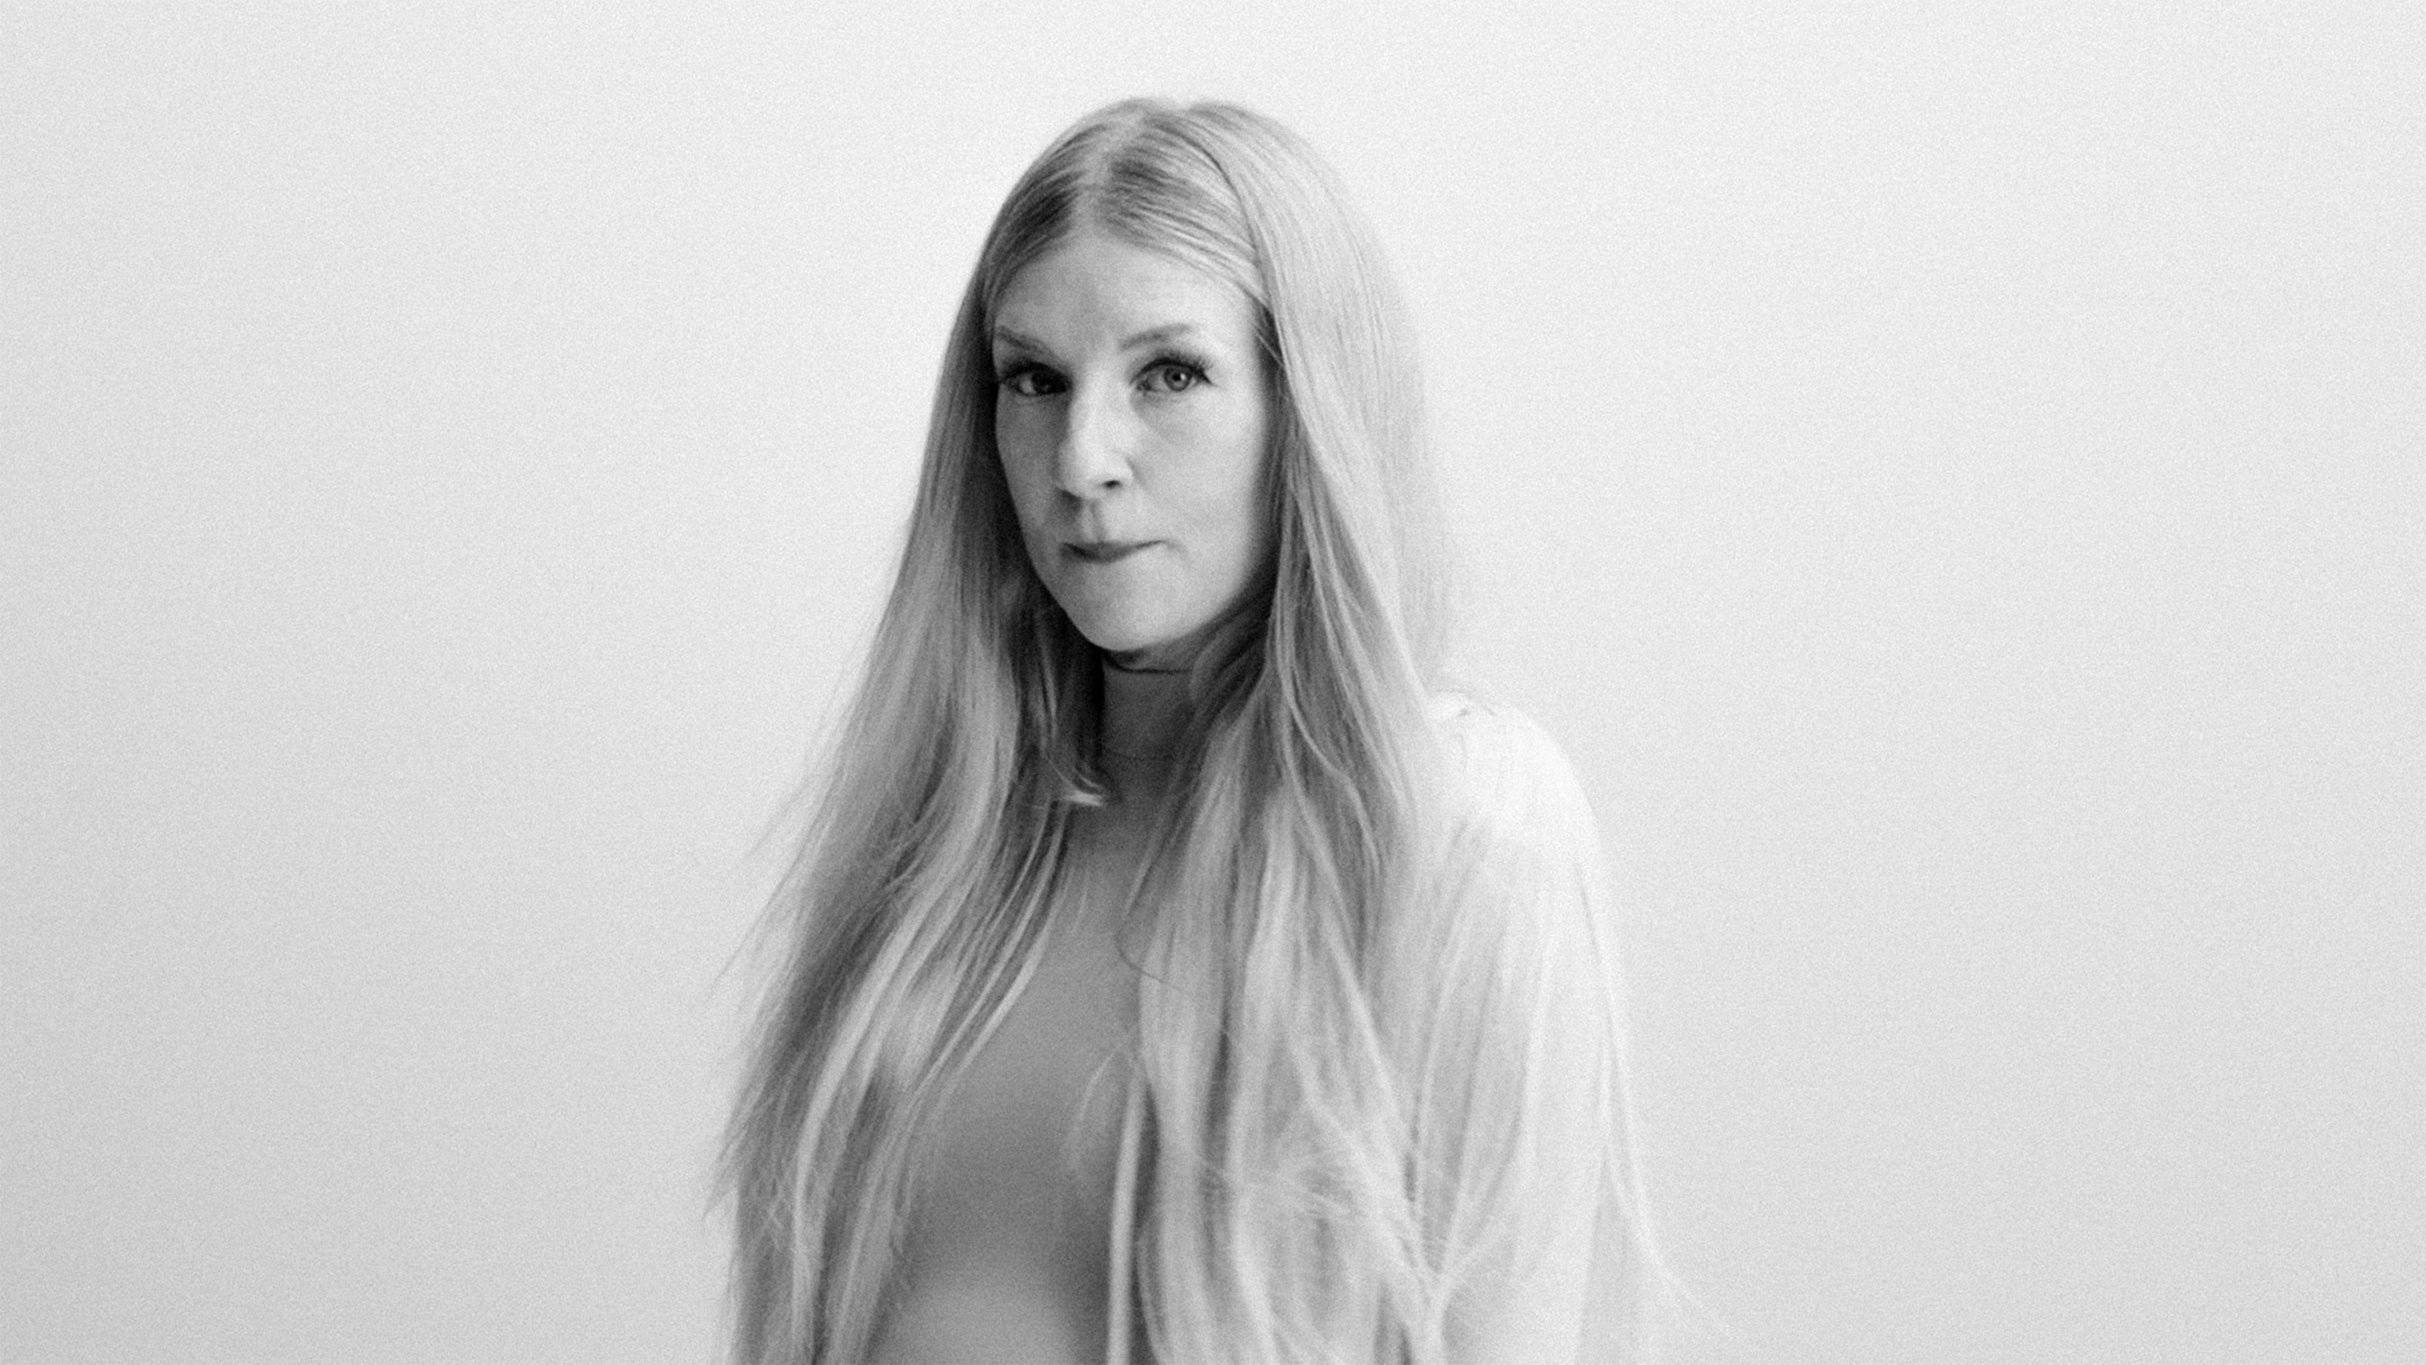 ionnalee | iamamiwhoami - Be Here Soon World Tour free presale code for show tickets in Philadelphia, PA (The Foundry)